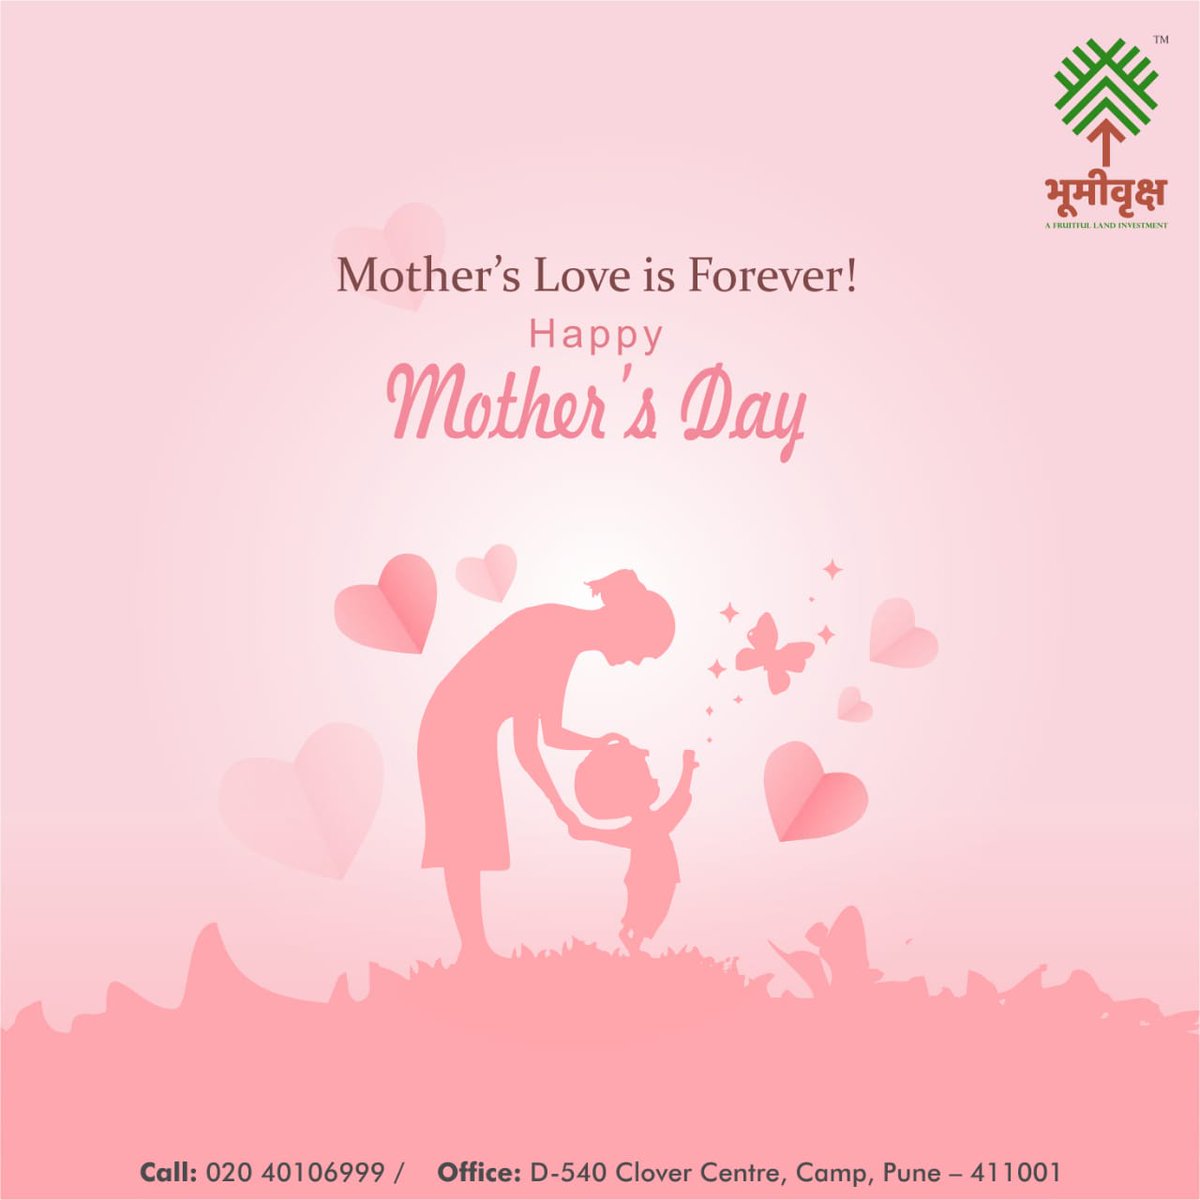 Happy Mother's Day to all the amazing moms out there! We want to take a moment to appreciate all that you do for your families and loved ones. You truly are superheroes in our eyes!
.
.
#bhumivruksh #mothersday #pune #landproperties